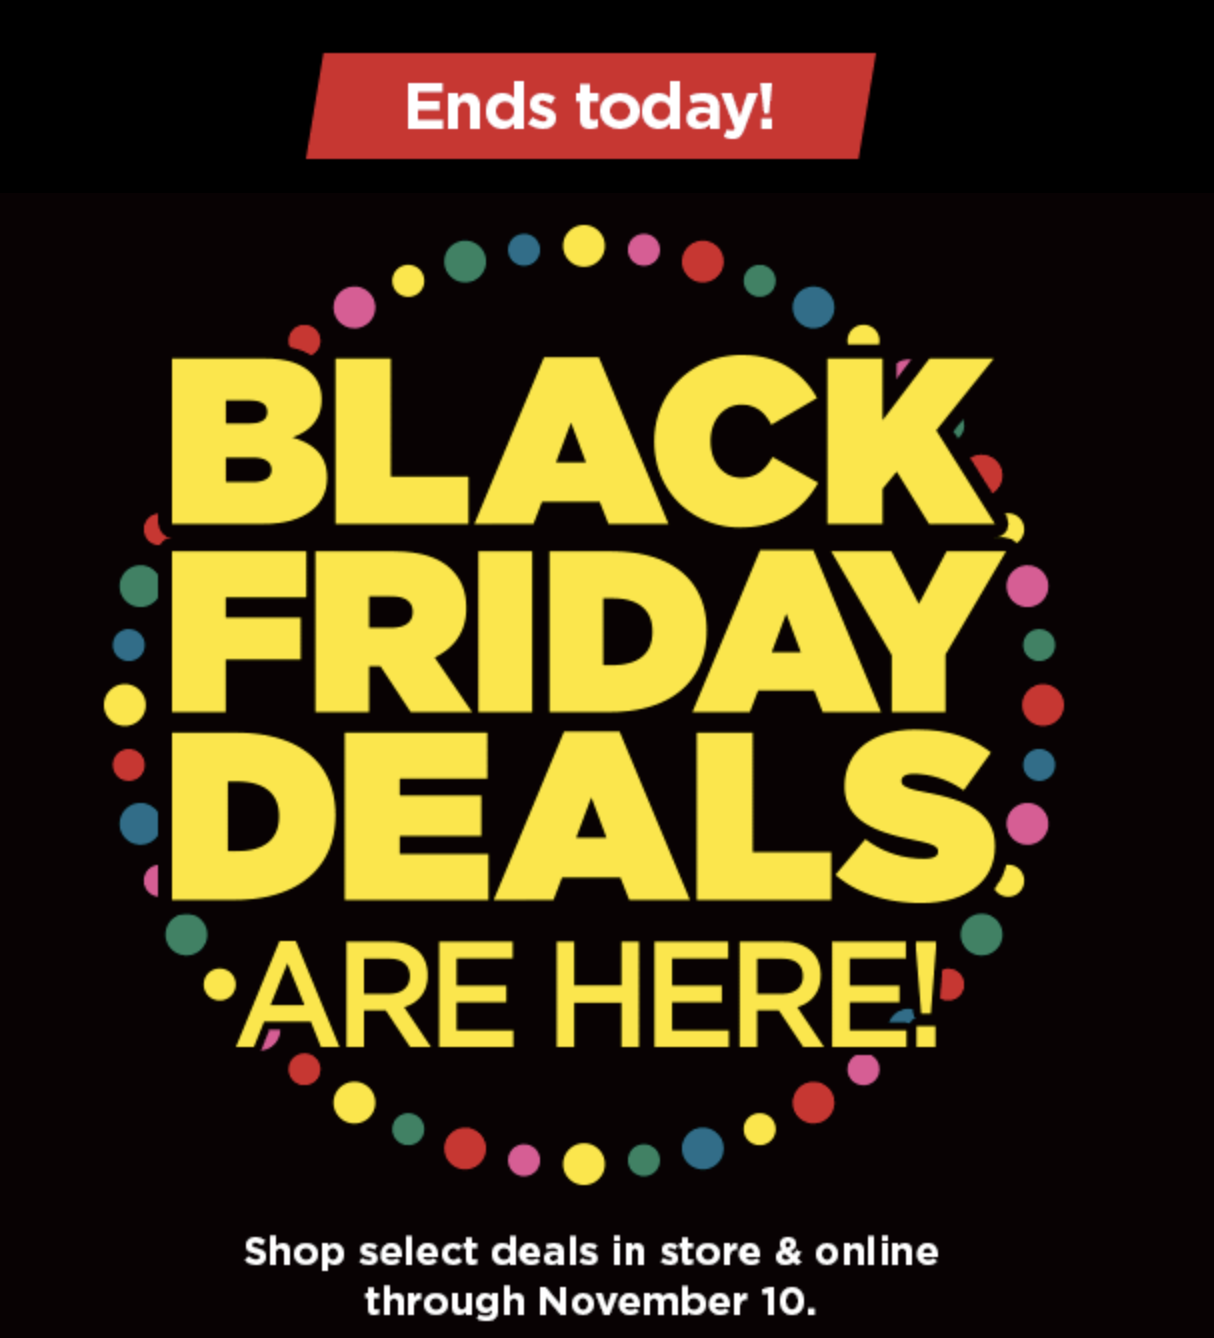 Kohl's Black Friday 3 Day Deals End Today! :: Southern Savers